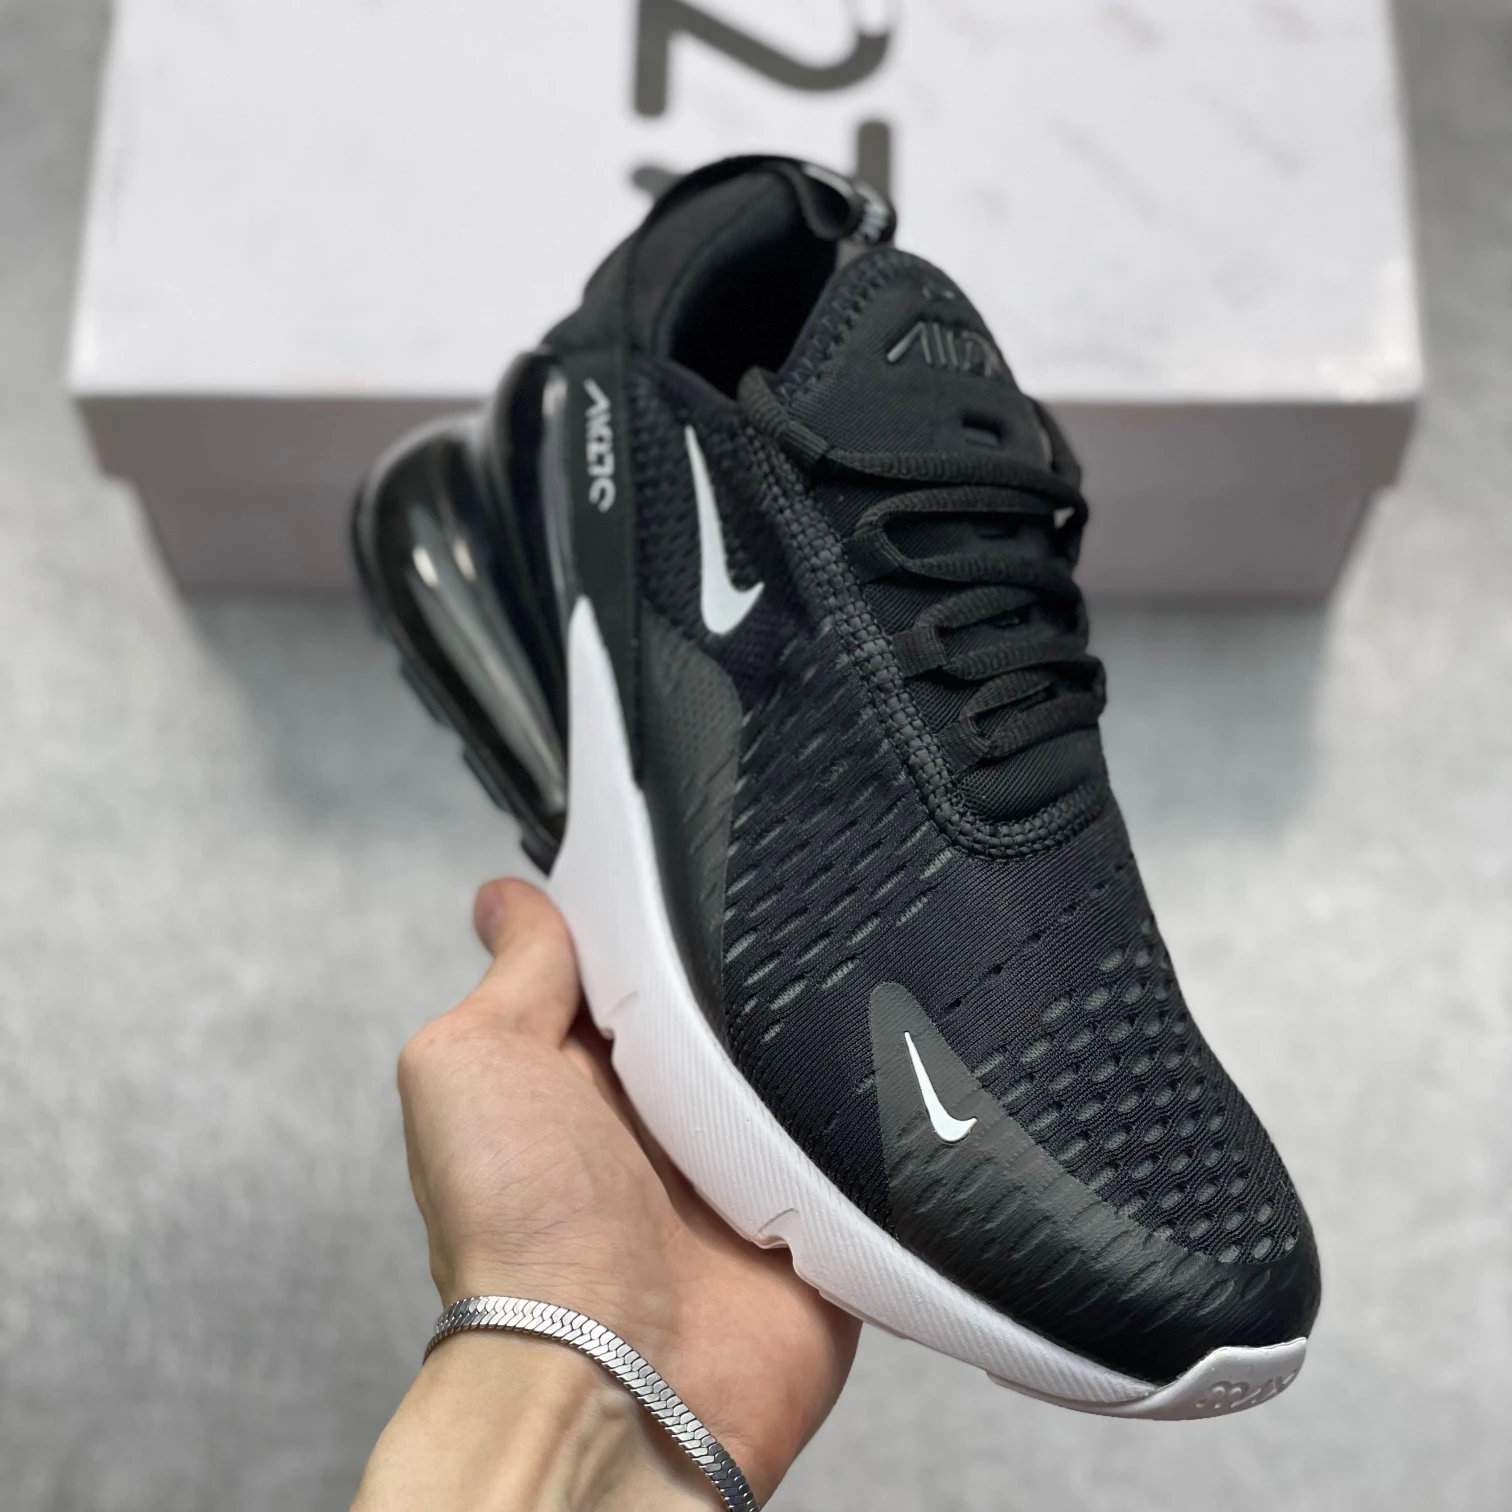 

High Quality Flyknit Sports Fitness Mens Running Nike Air Max 270 Shoes